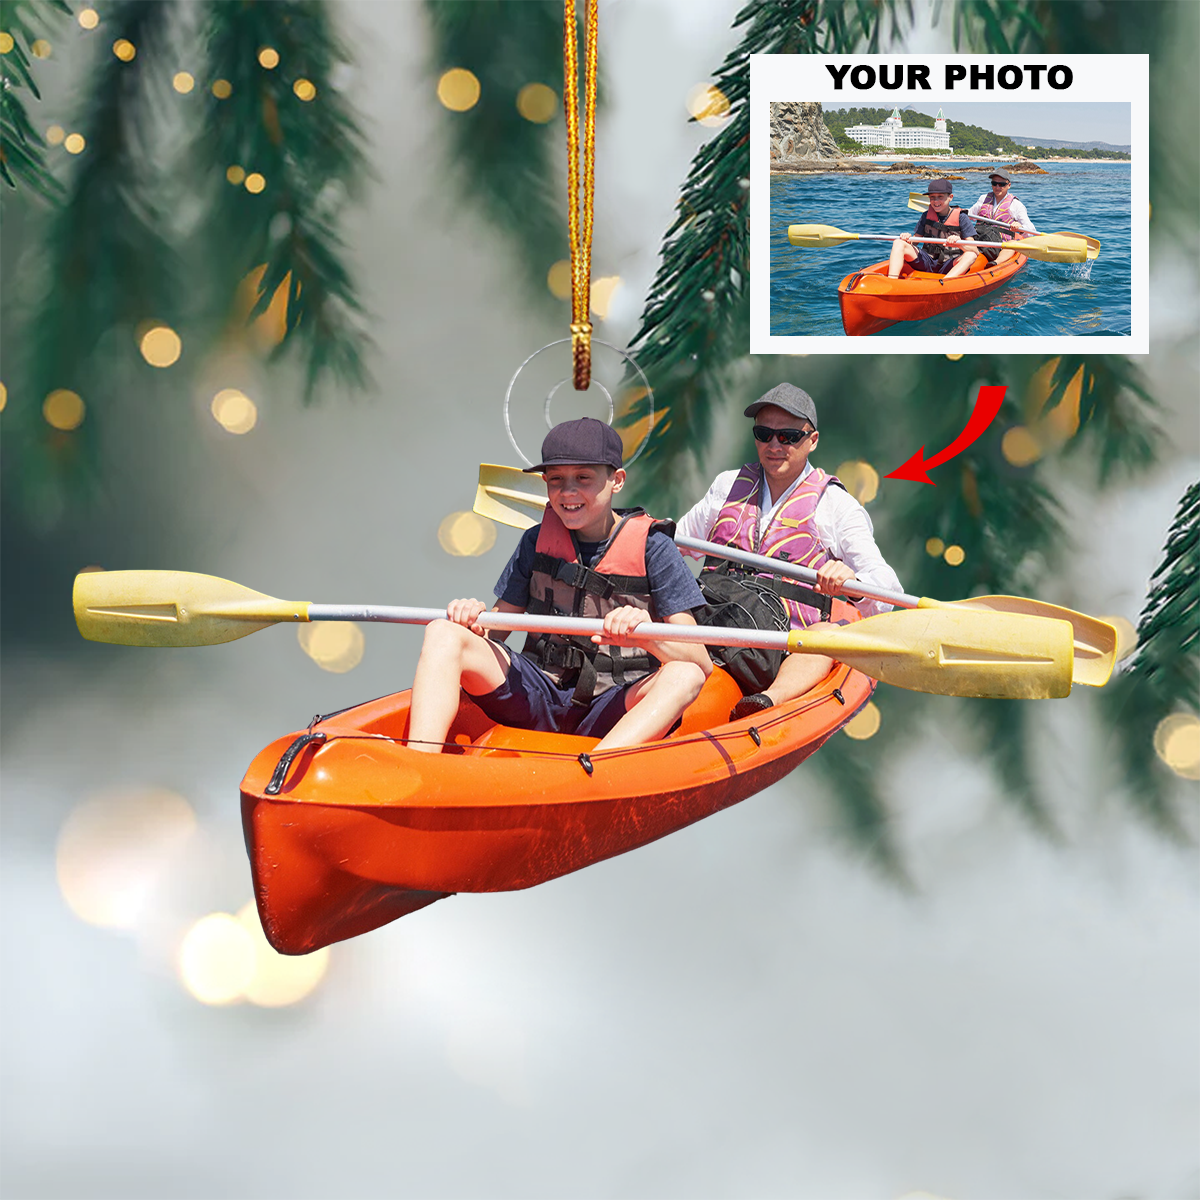 I'd Rather Be Kayaking - Personalized Custom Photo Mica Ornament - Christmas Gift For Kayak Lover, Kayakers